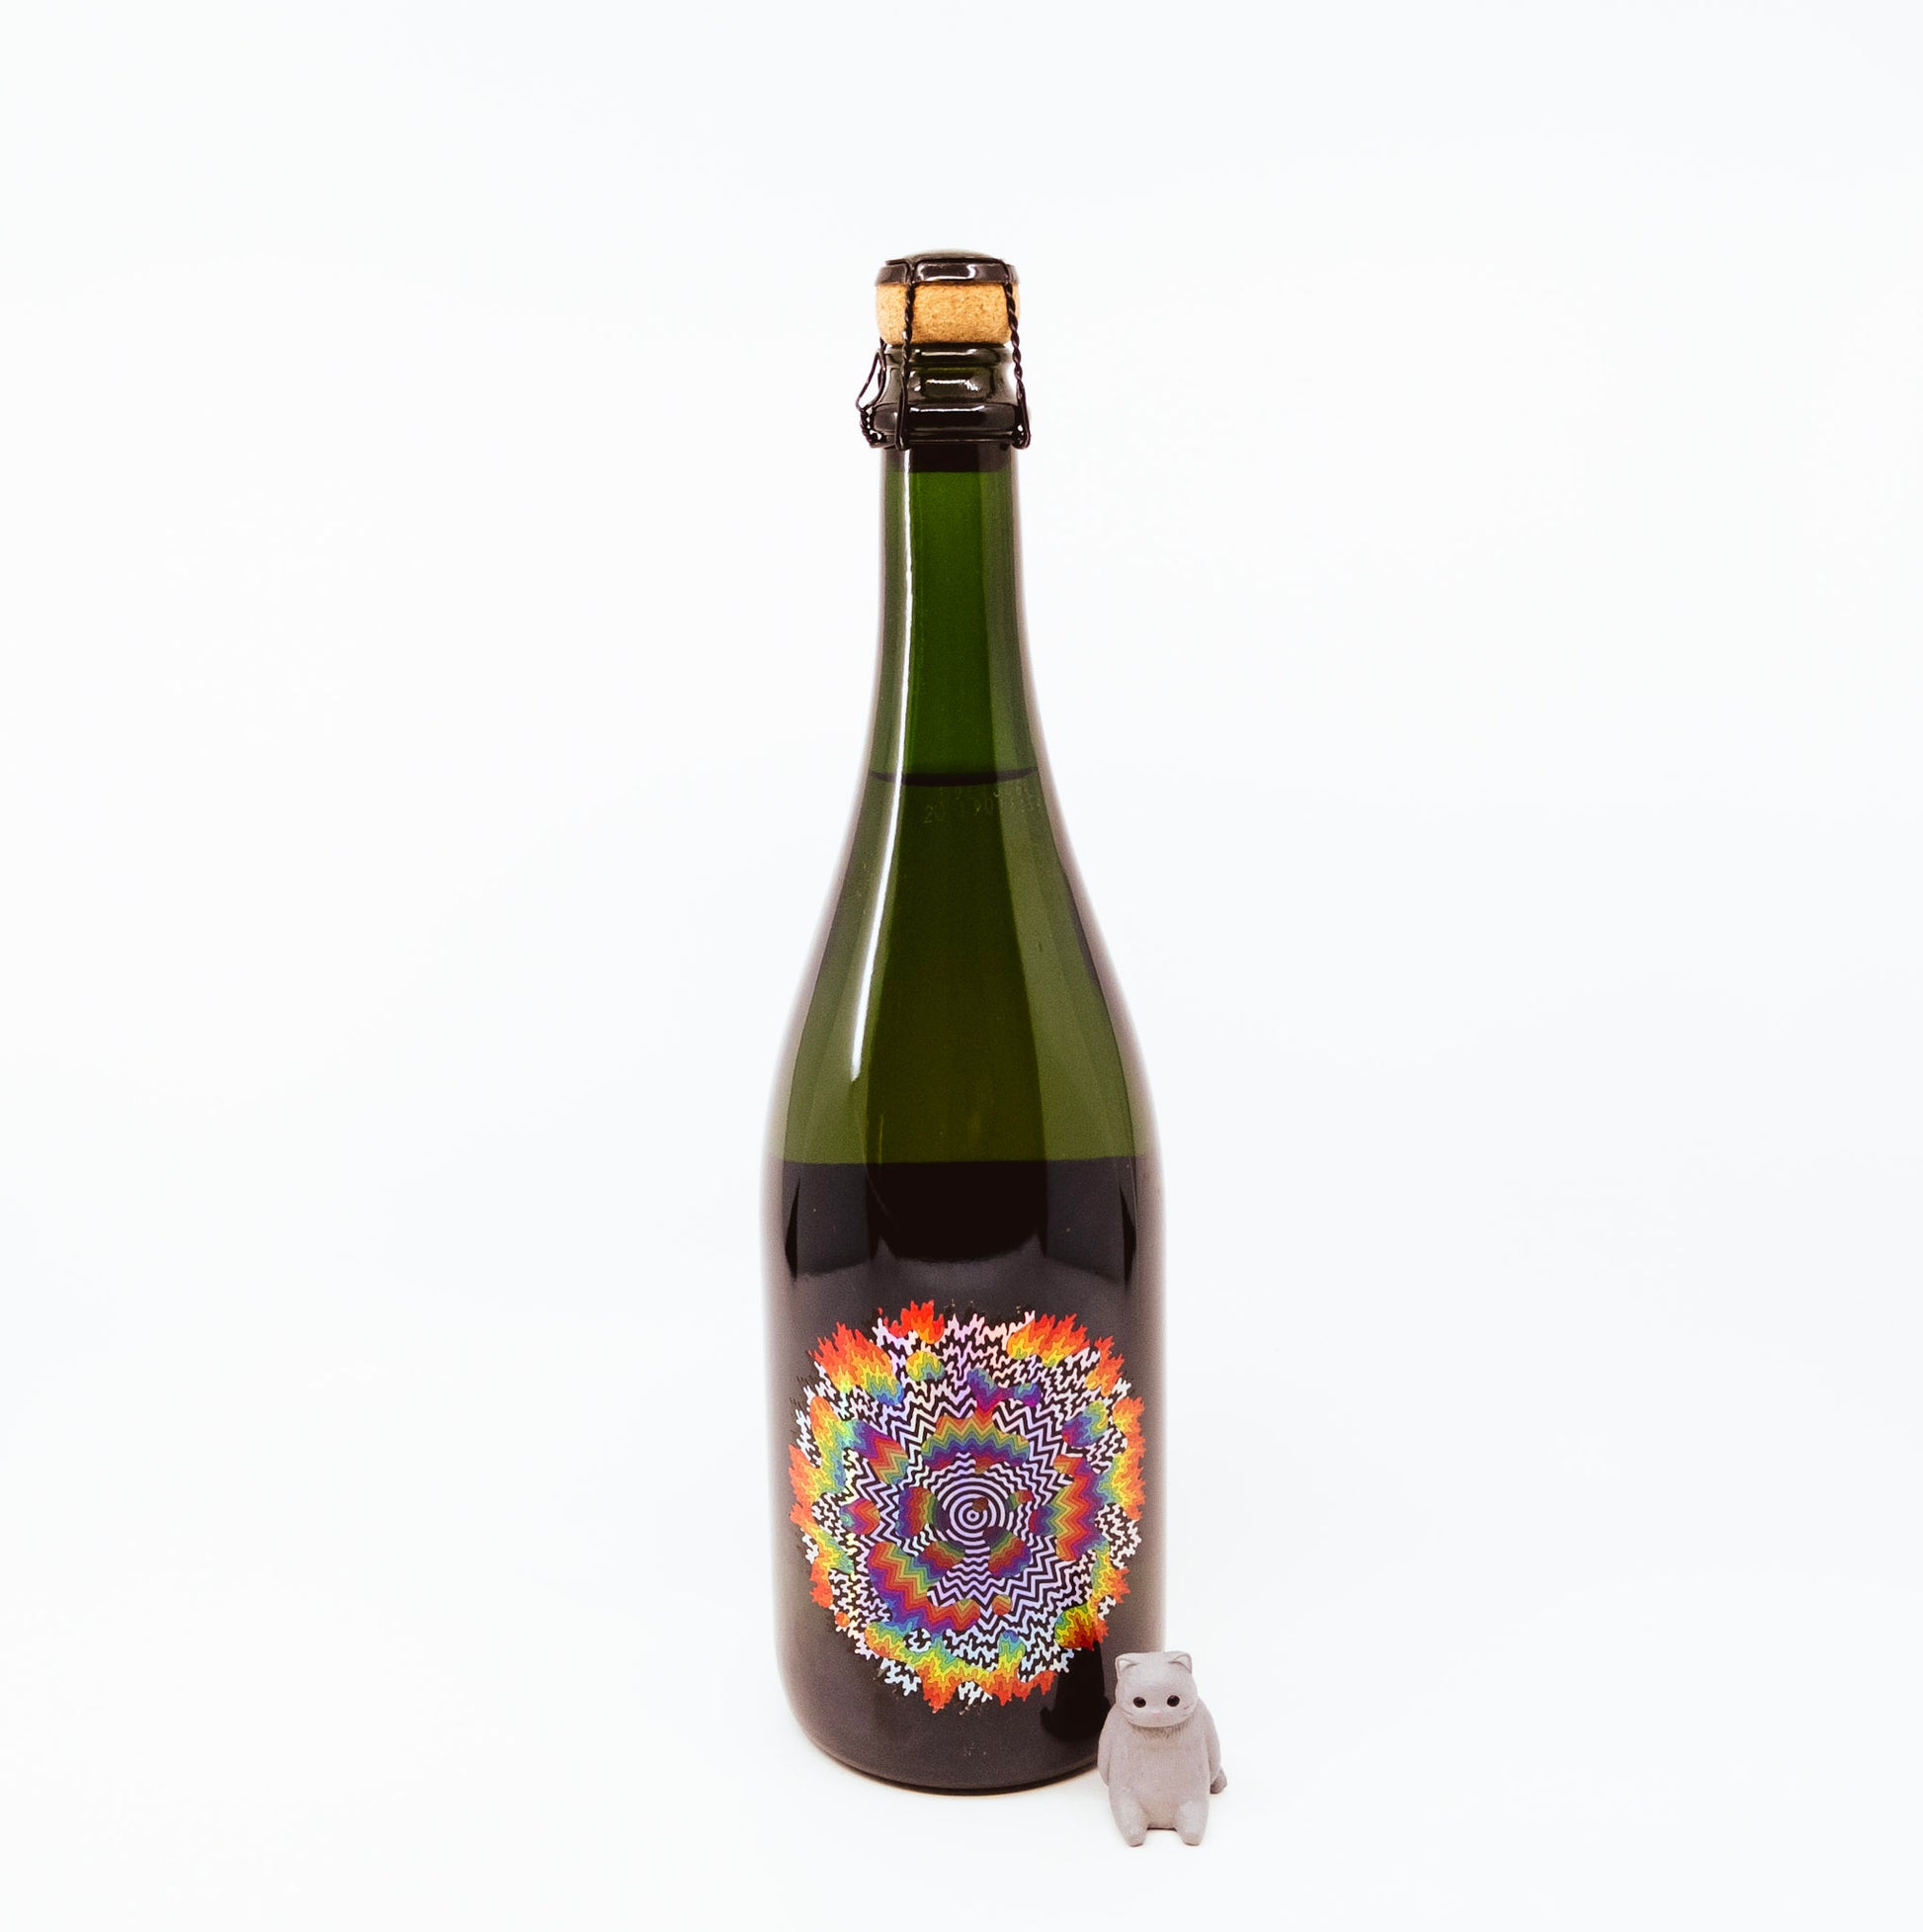 wine bottle with psychedelic label